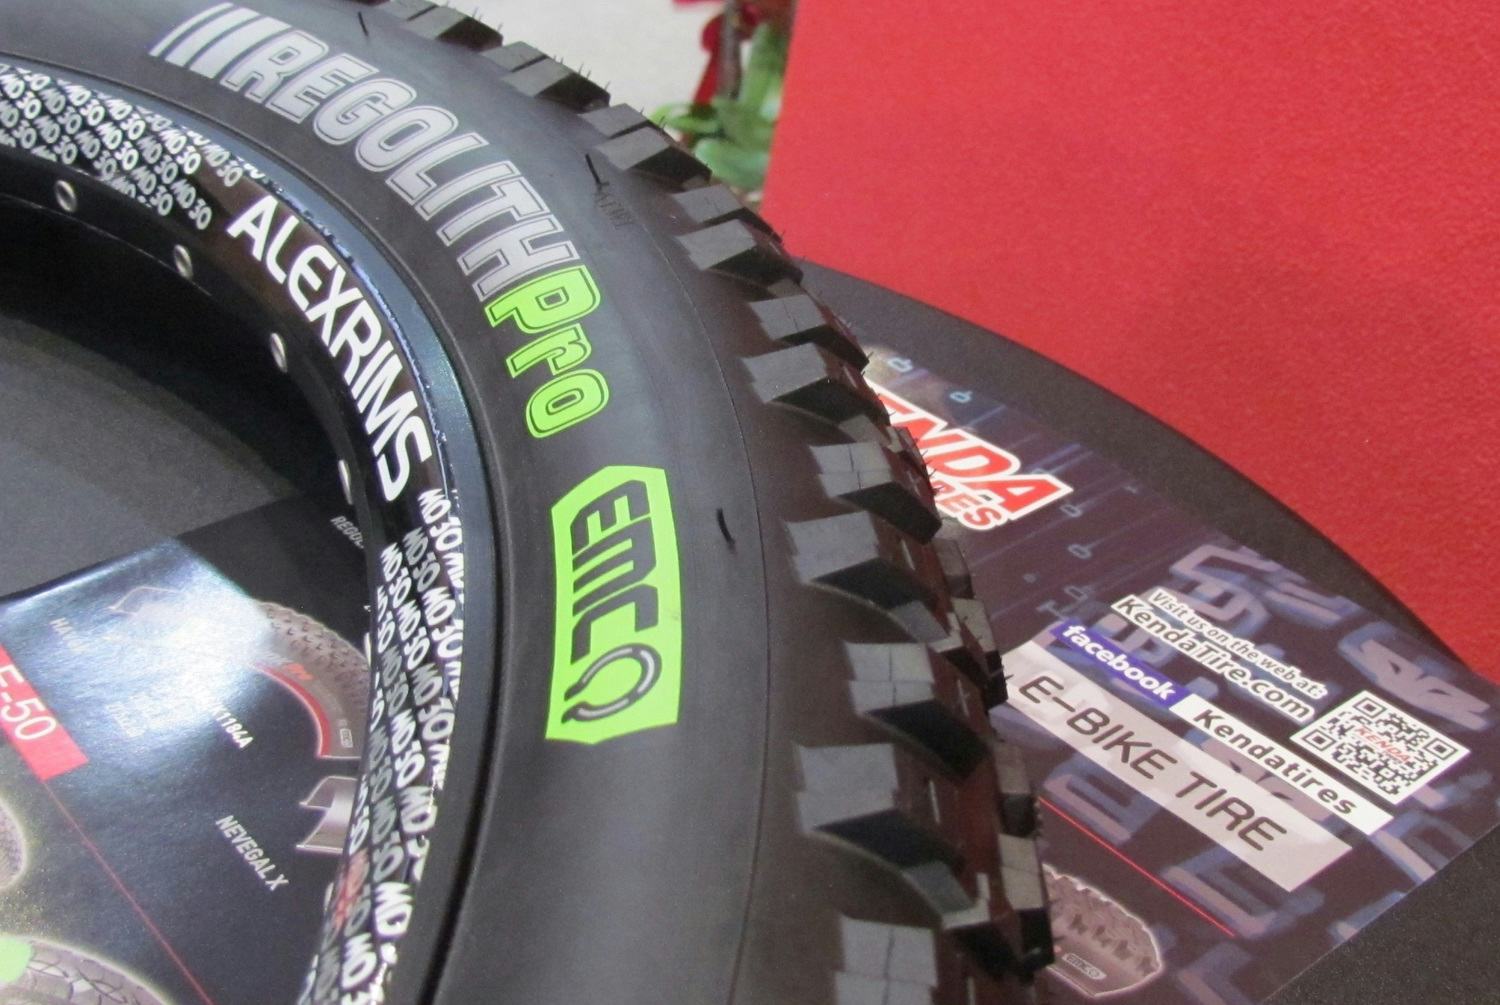 New Regolith e-MTB tyre series is presented by Kenda at Eurobike. – Photo Bike Europe